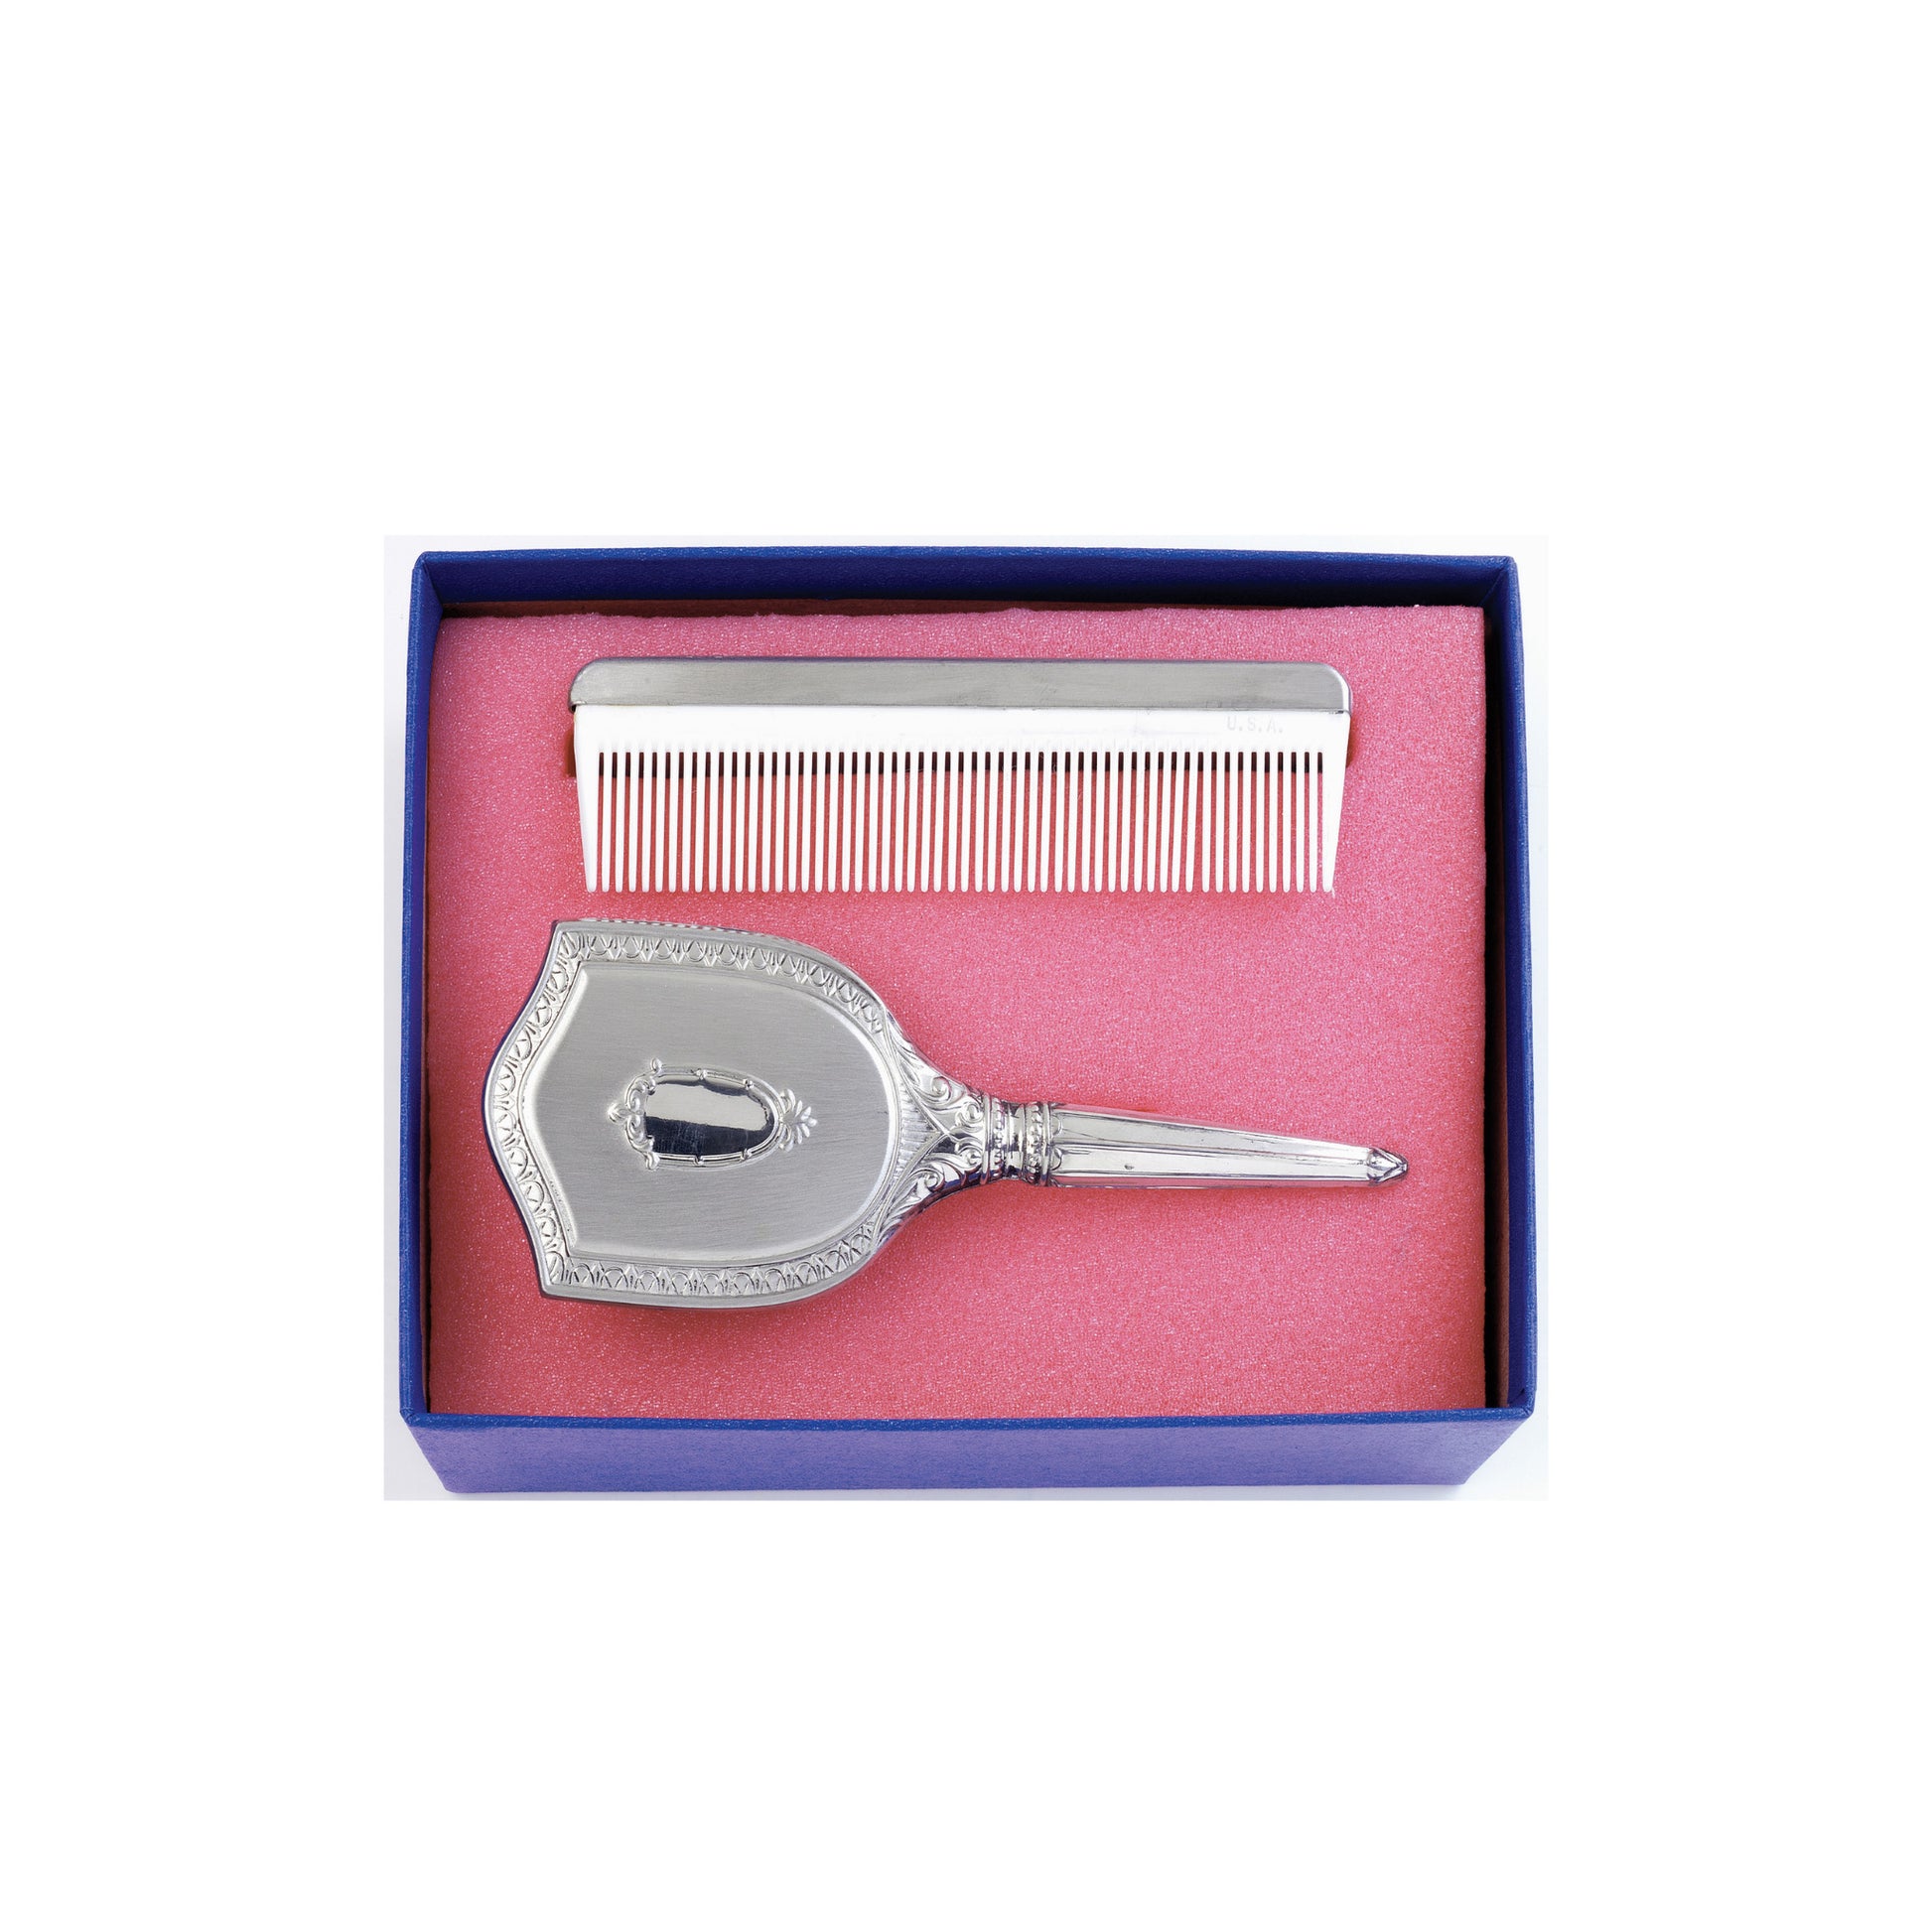 Girl's Comb and Brush Gift Set in Gift Box